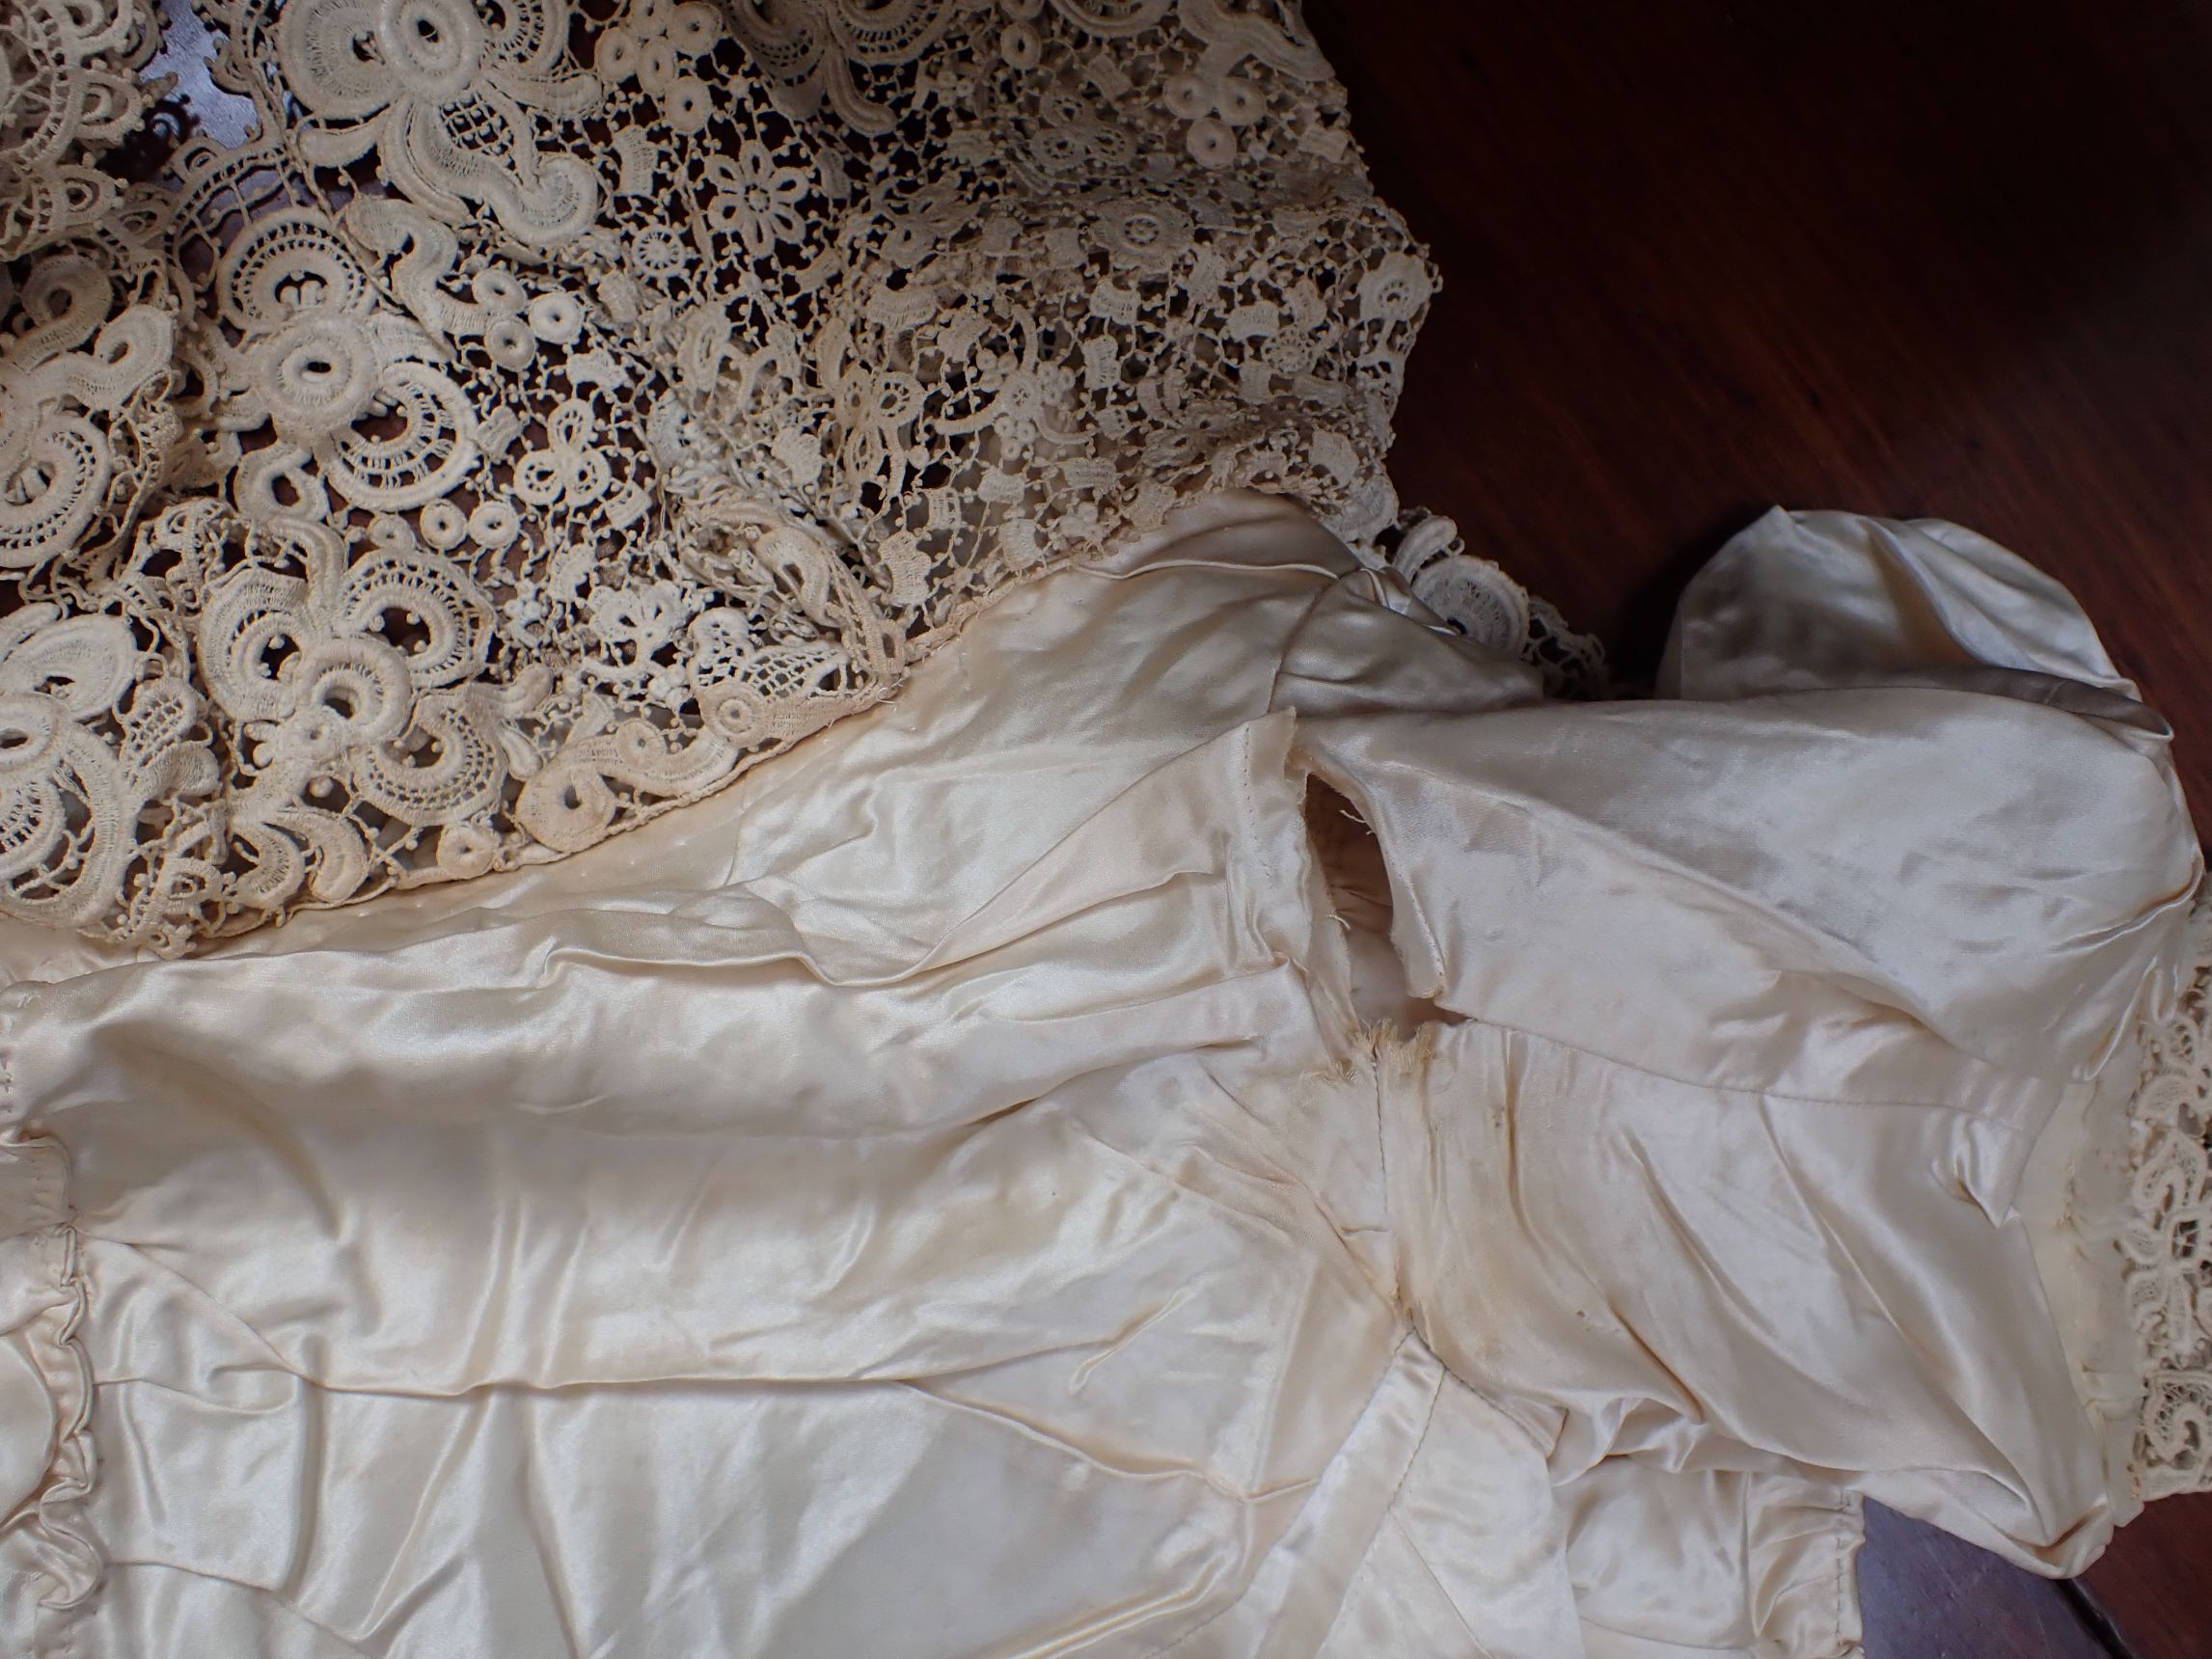 A LATE VICTORIAN SILK WEDDING DRESS, WITH LACE COLLAR AND PANELS - Image 8 of 11